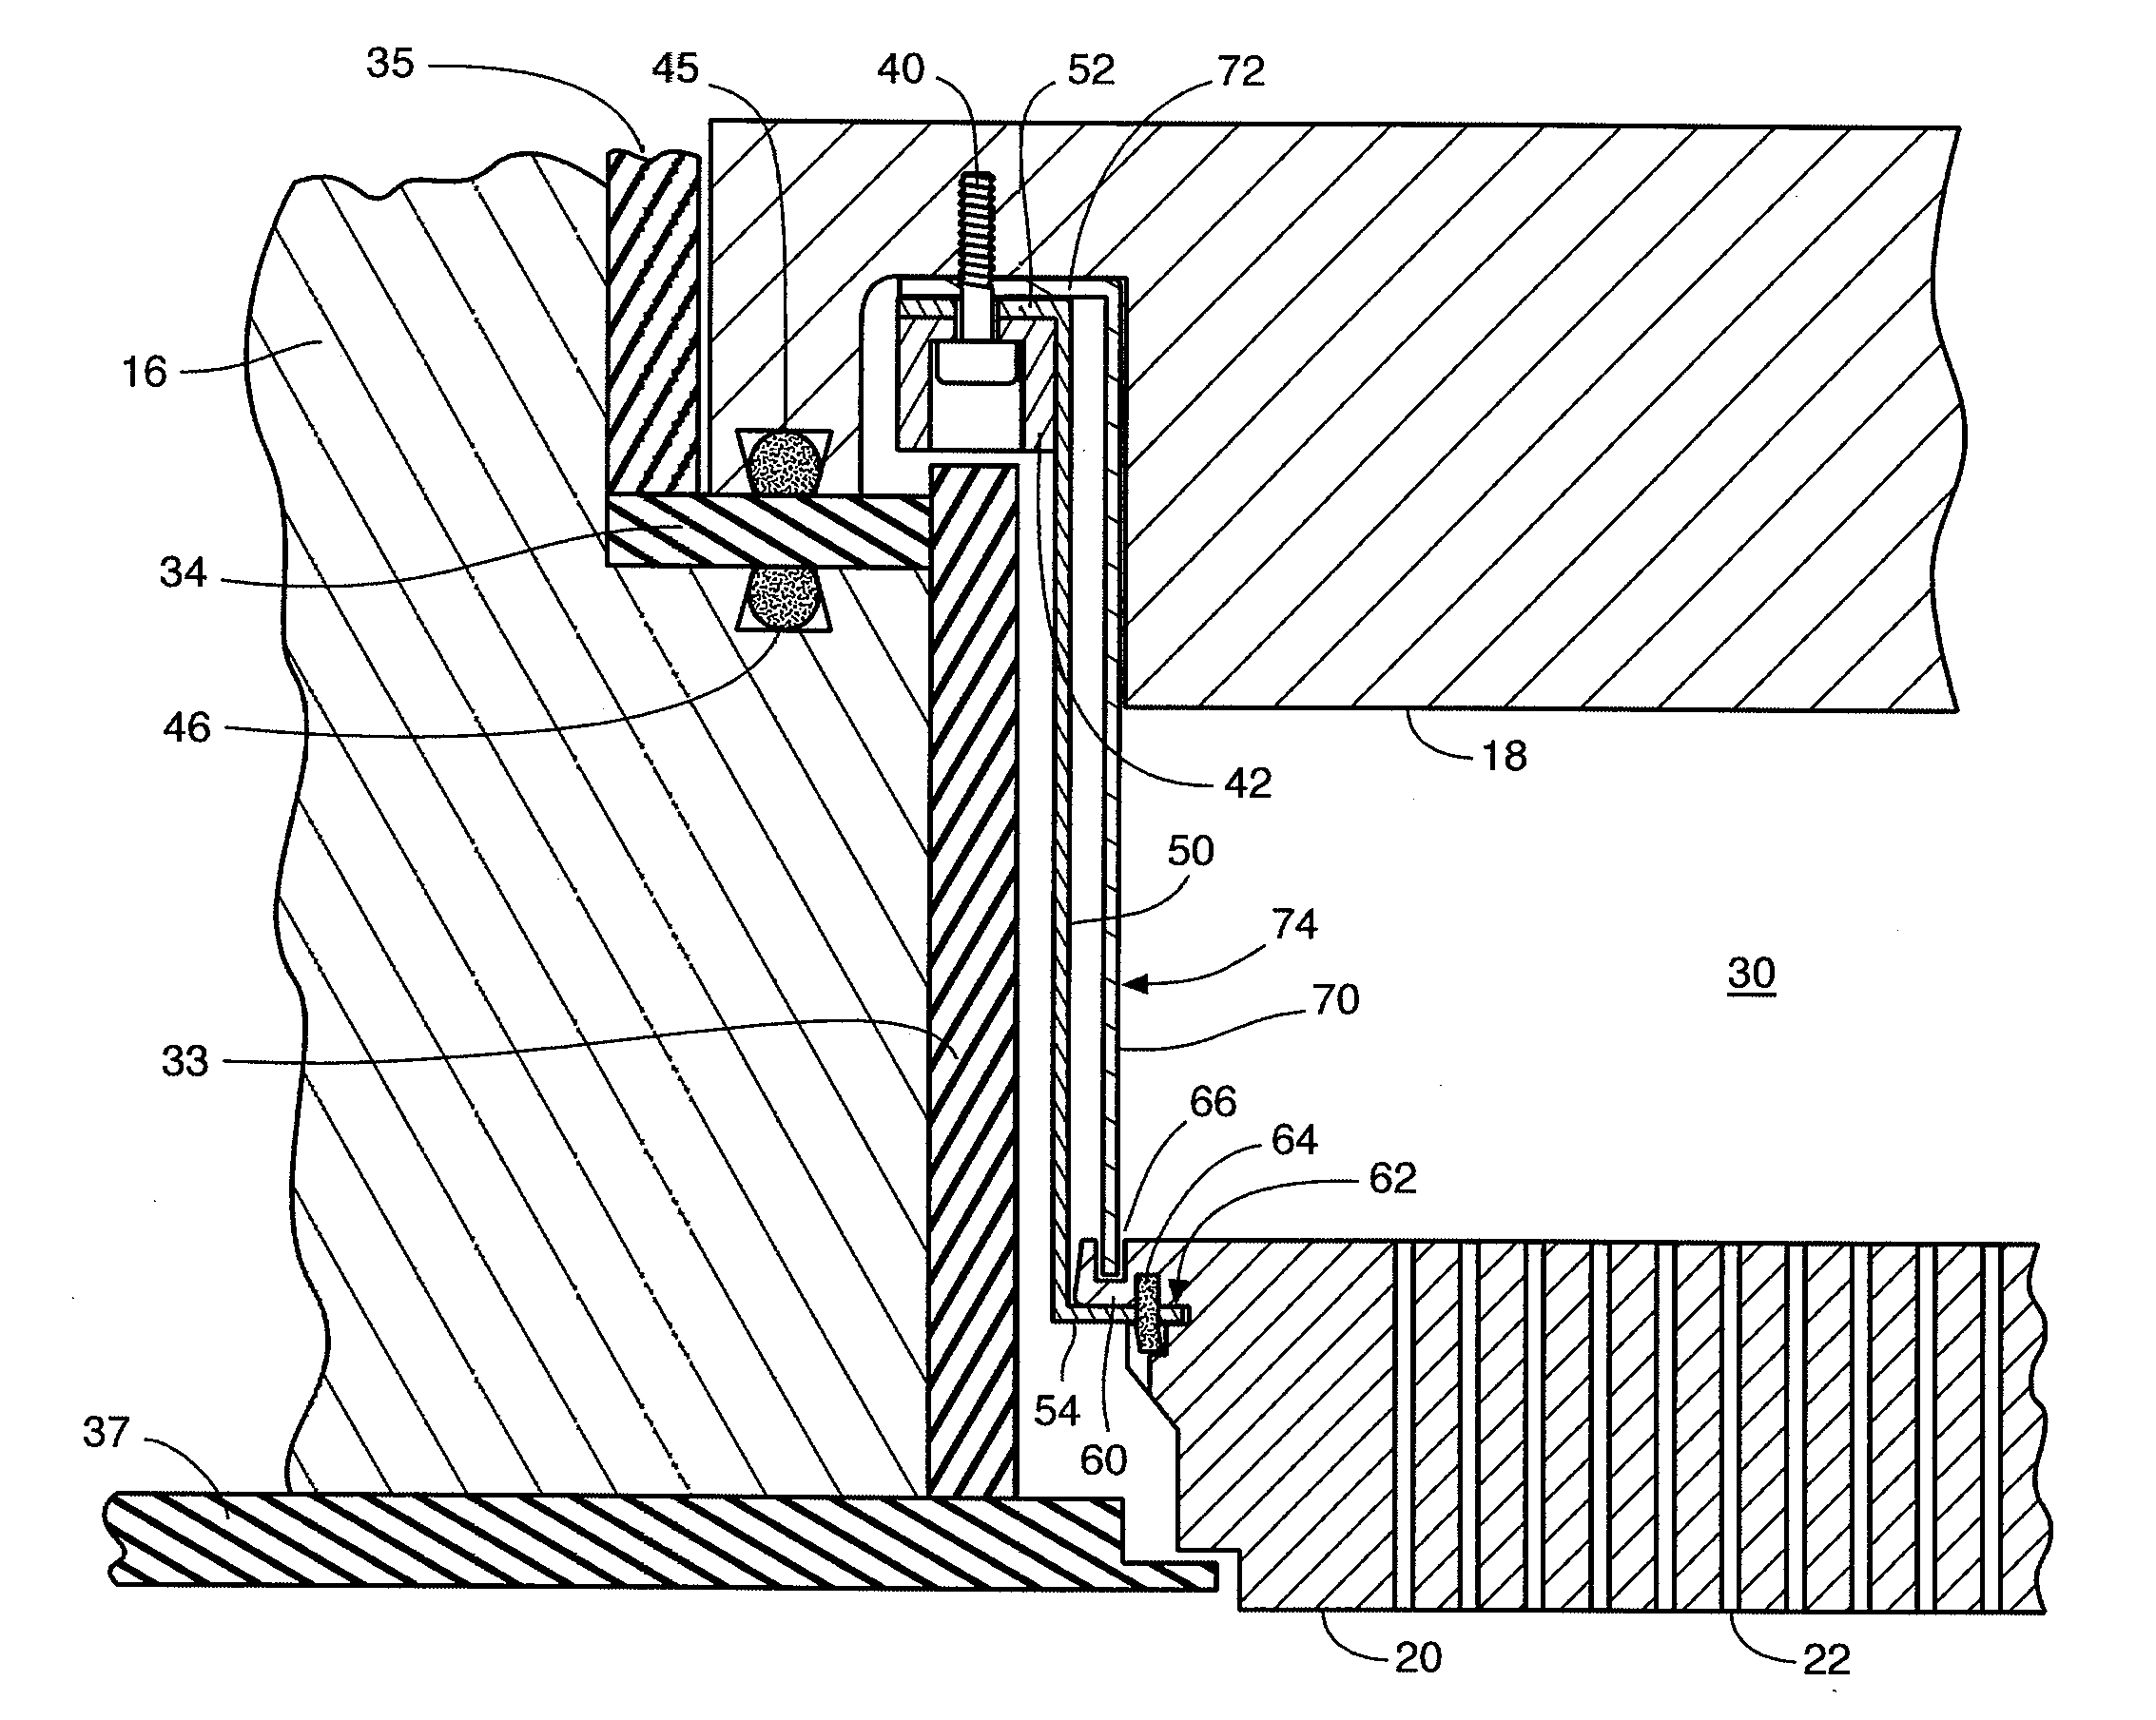 Suspension for showerhead in process chamber